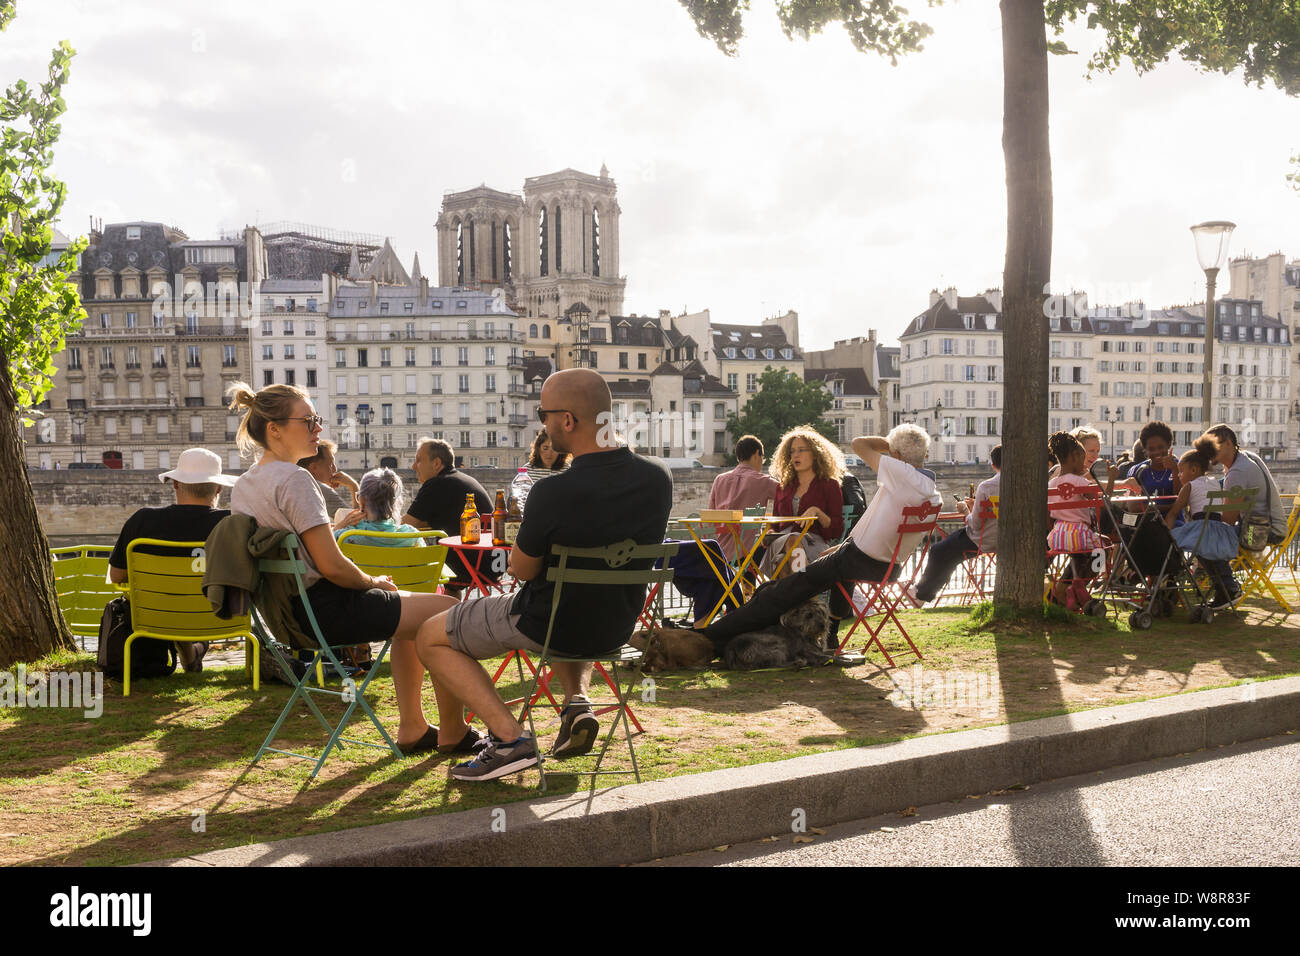 Paris Seine right bank - People chatting and relaxing on the right embankment of the Seine River on a summer day in Paris, France, Europe. Stock Photo